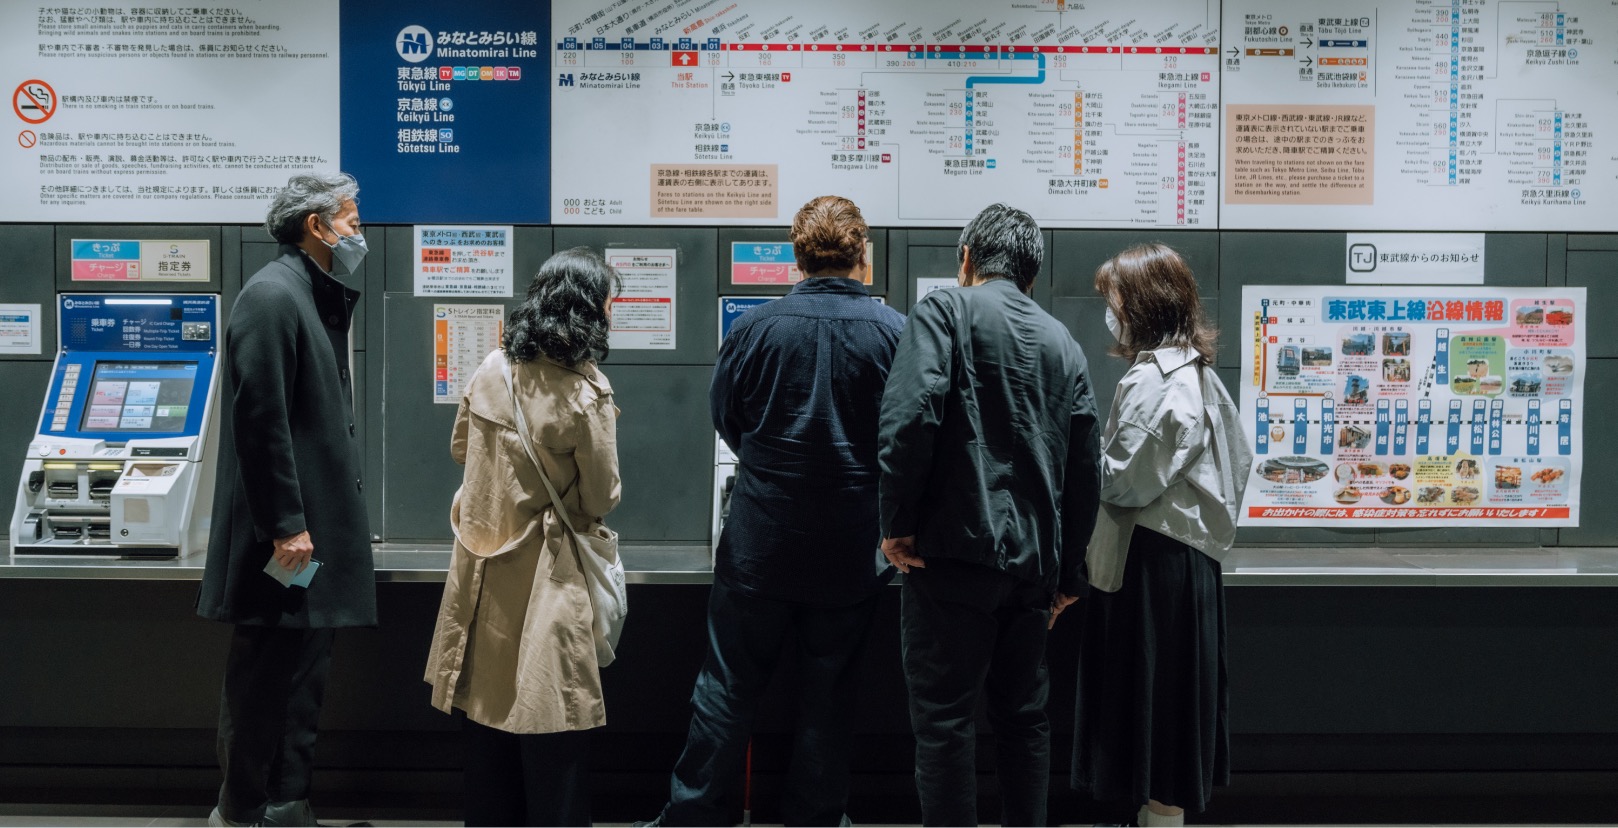 A group of people at the ticketing booth in a train station.